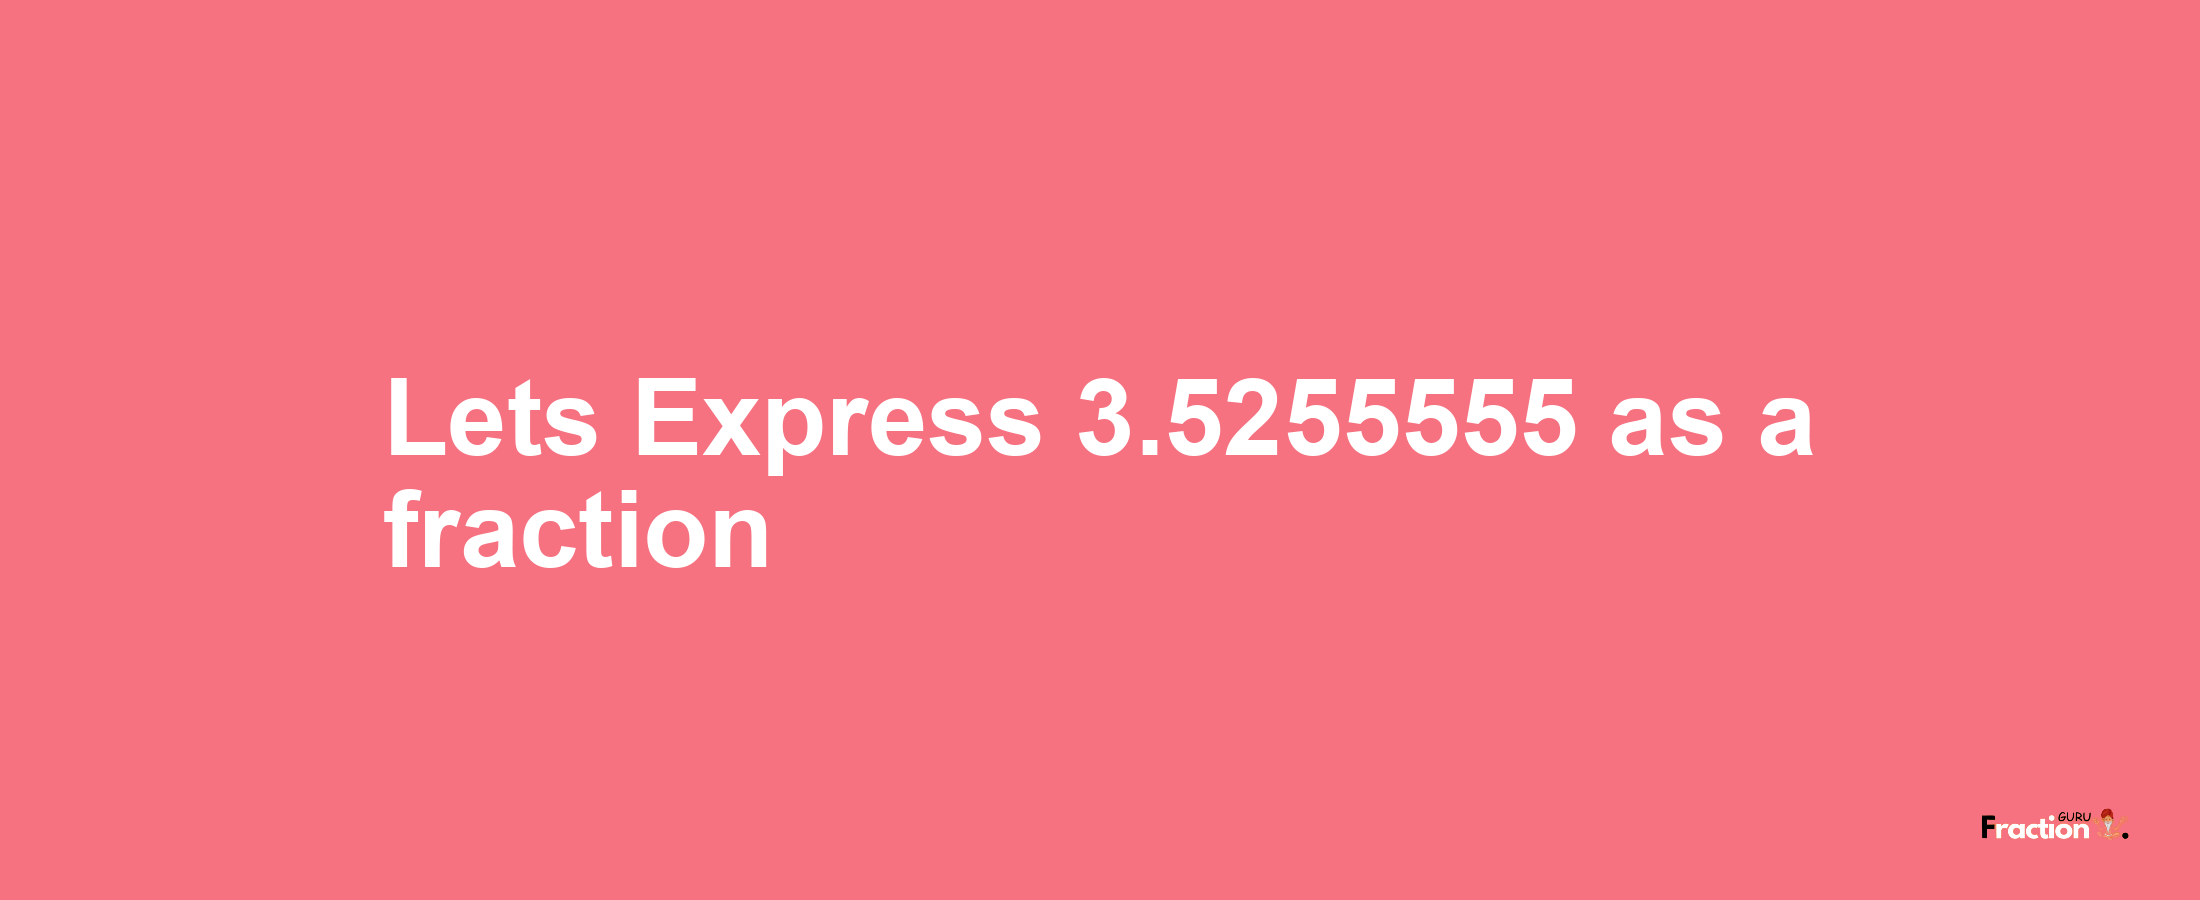 Lets Express 3.5255555 as afraction